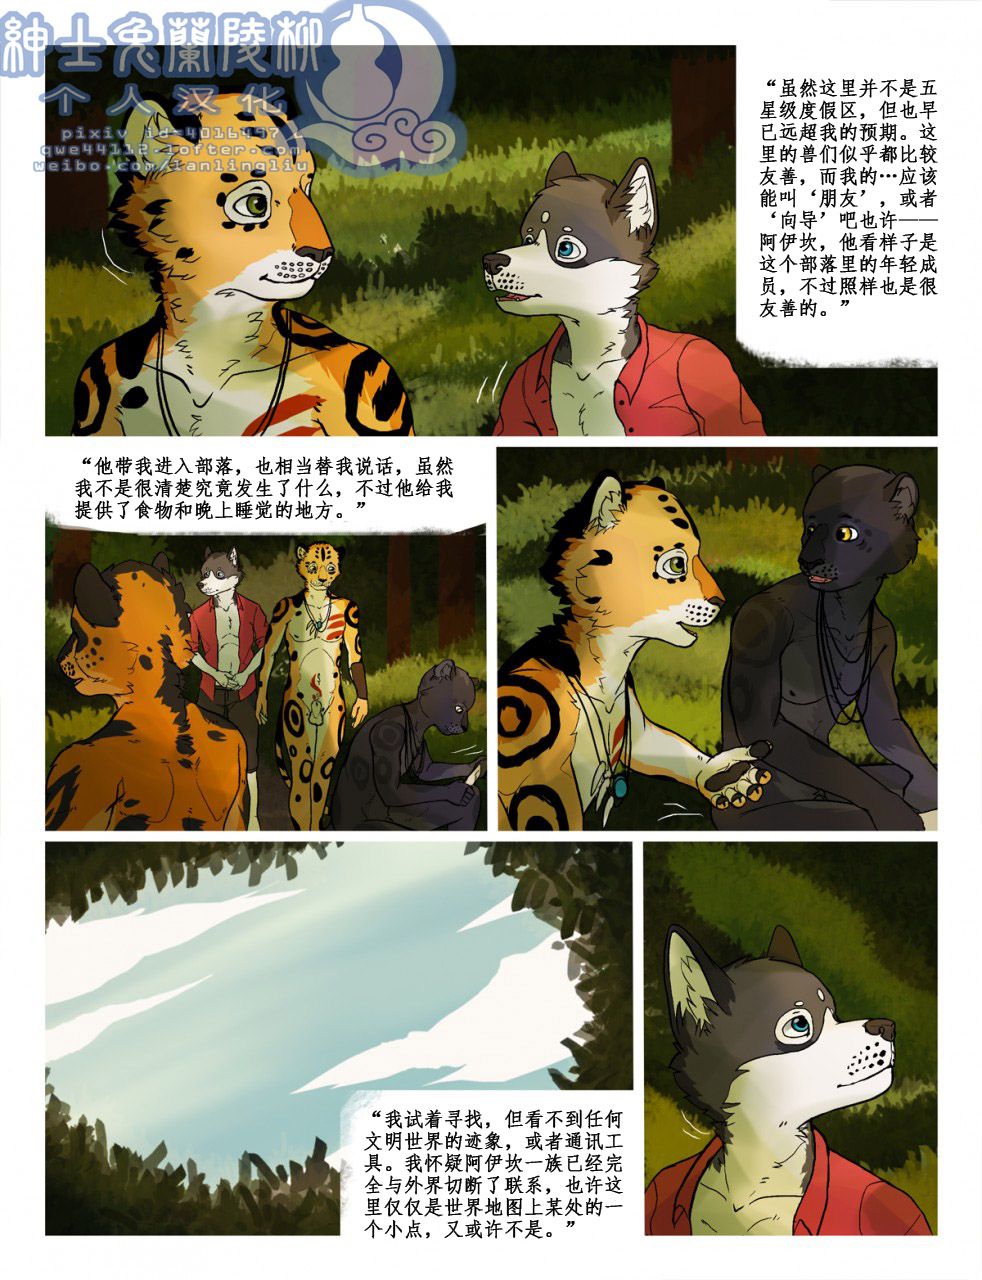 [Edesk Sisco] 失与寻 Lost and Found [Chinese] [绅士兔兰陵柳个人汉化] [Ongoing] [翻译进行中] 33